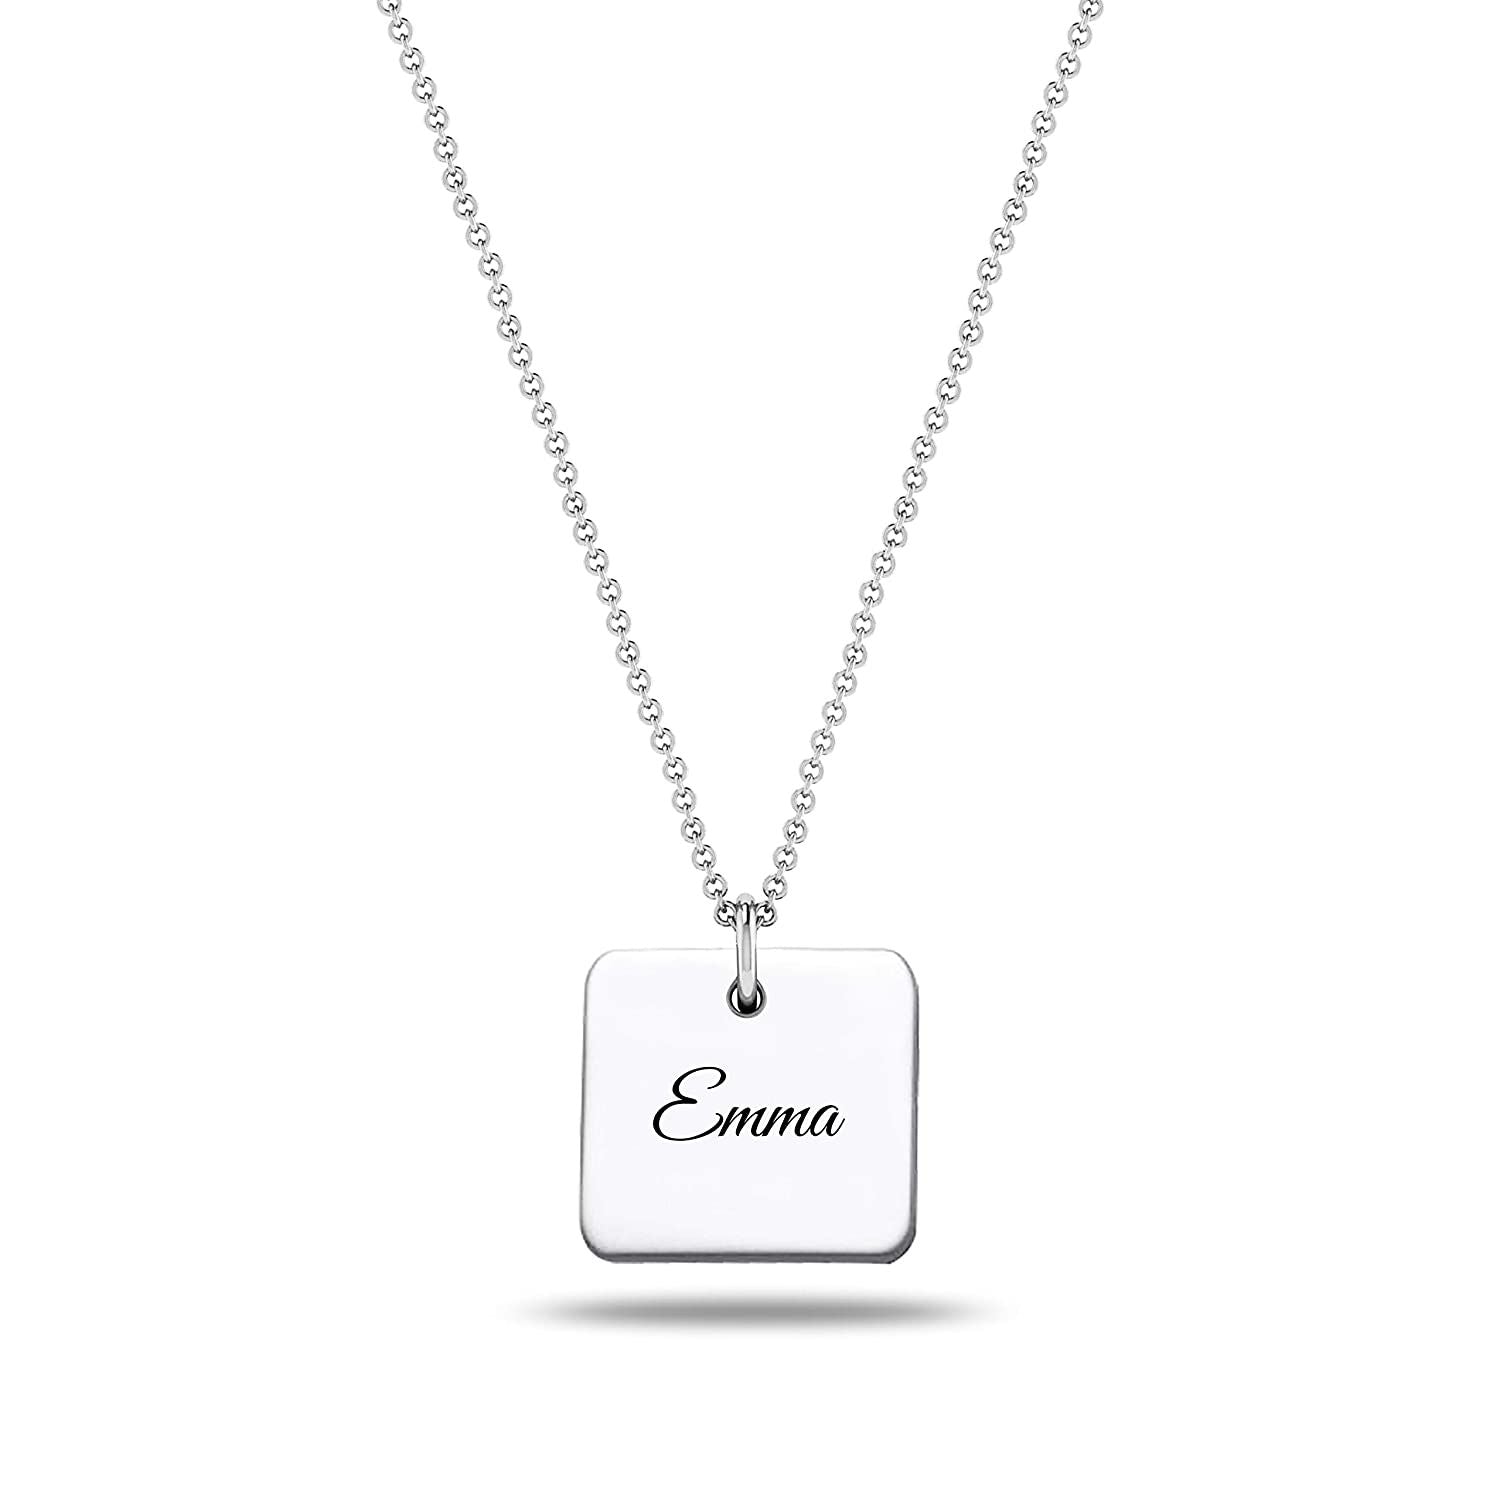 Personalised 925 Sterling Silver Charm Name Necklace for Teen Women